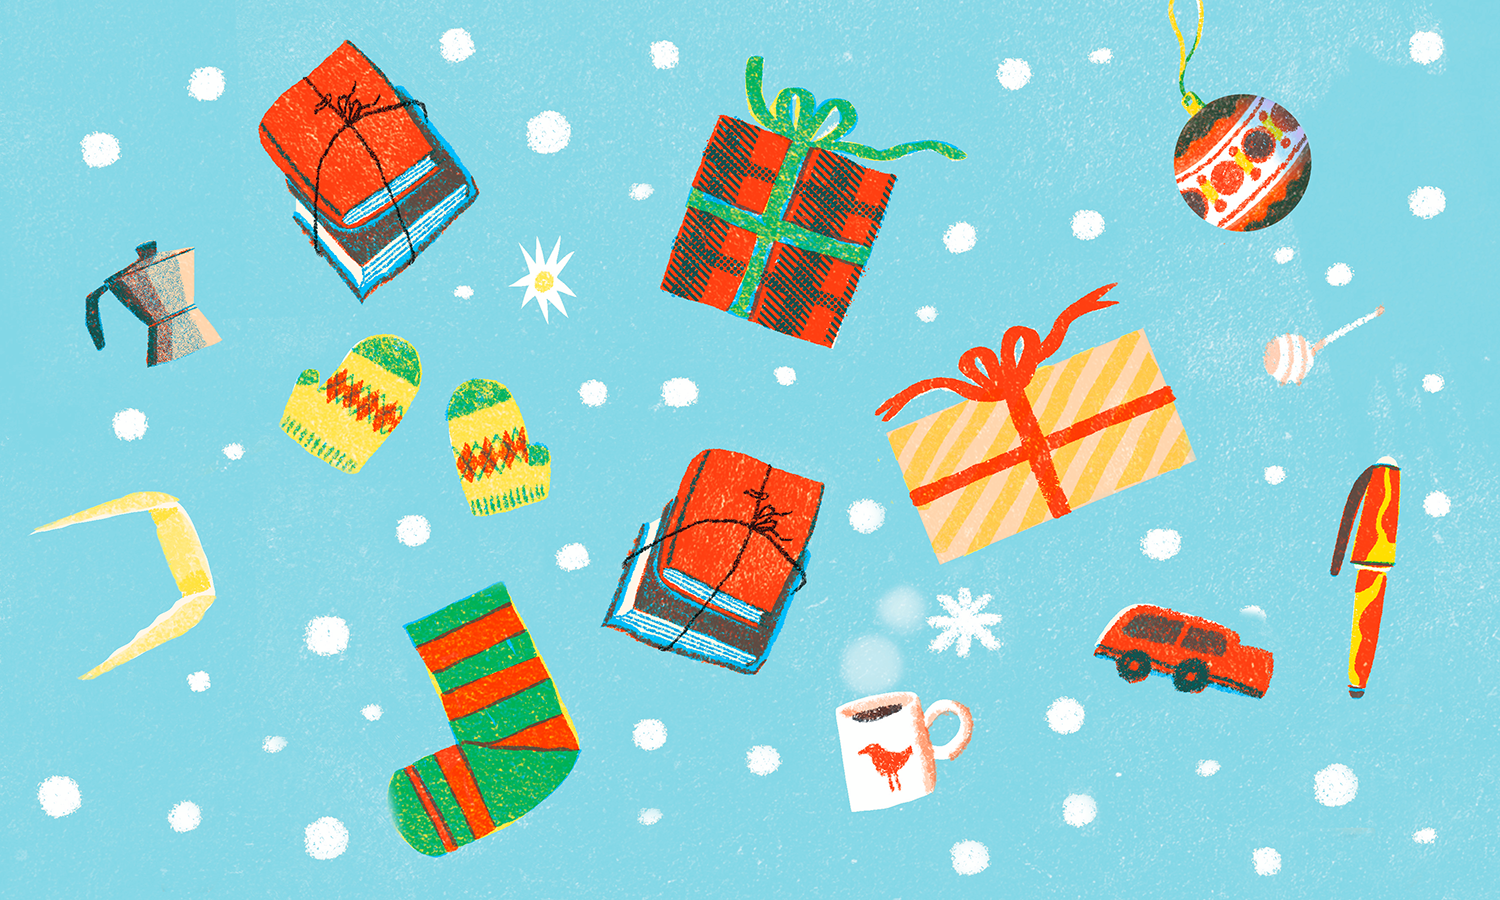 KUOW - Want to gift books this holiday season? Here are 30 ideas for kids  and adults